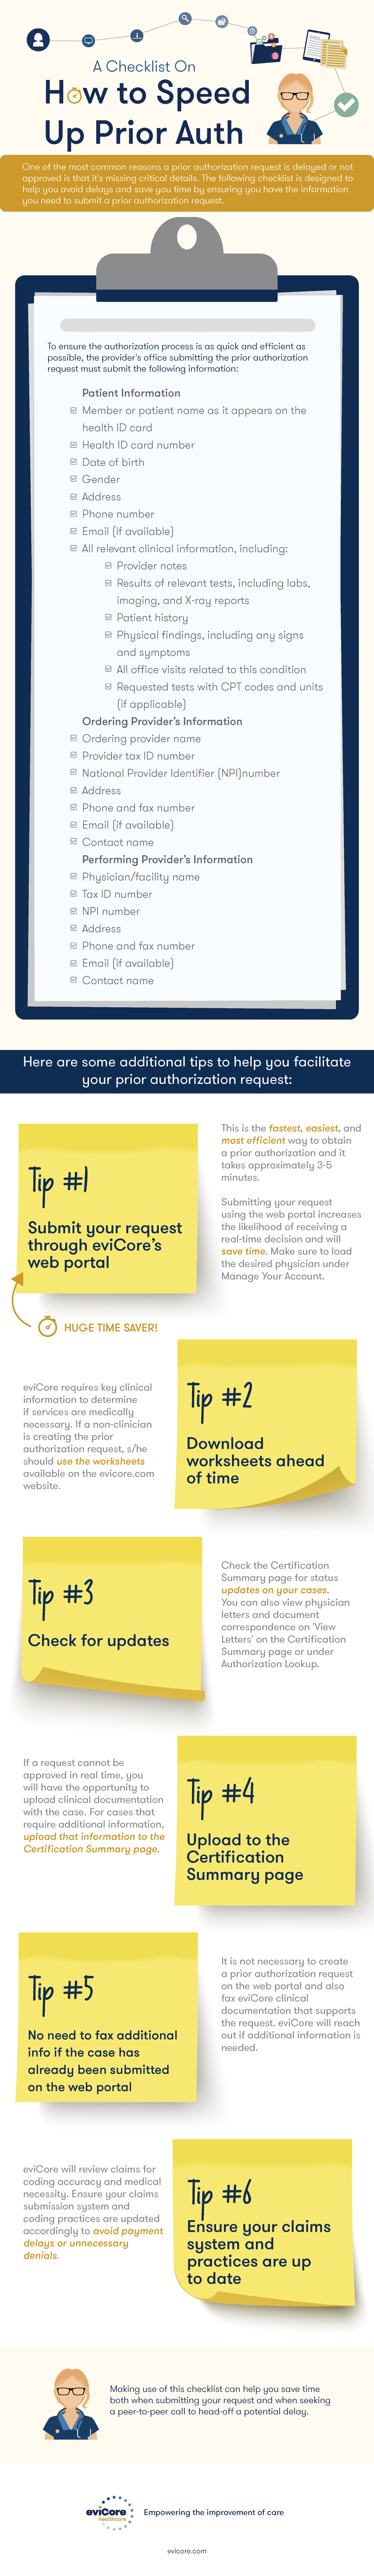 How to Speed Up Prior Authorization Checklist Infographic 